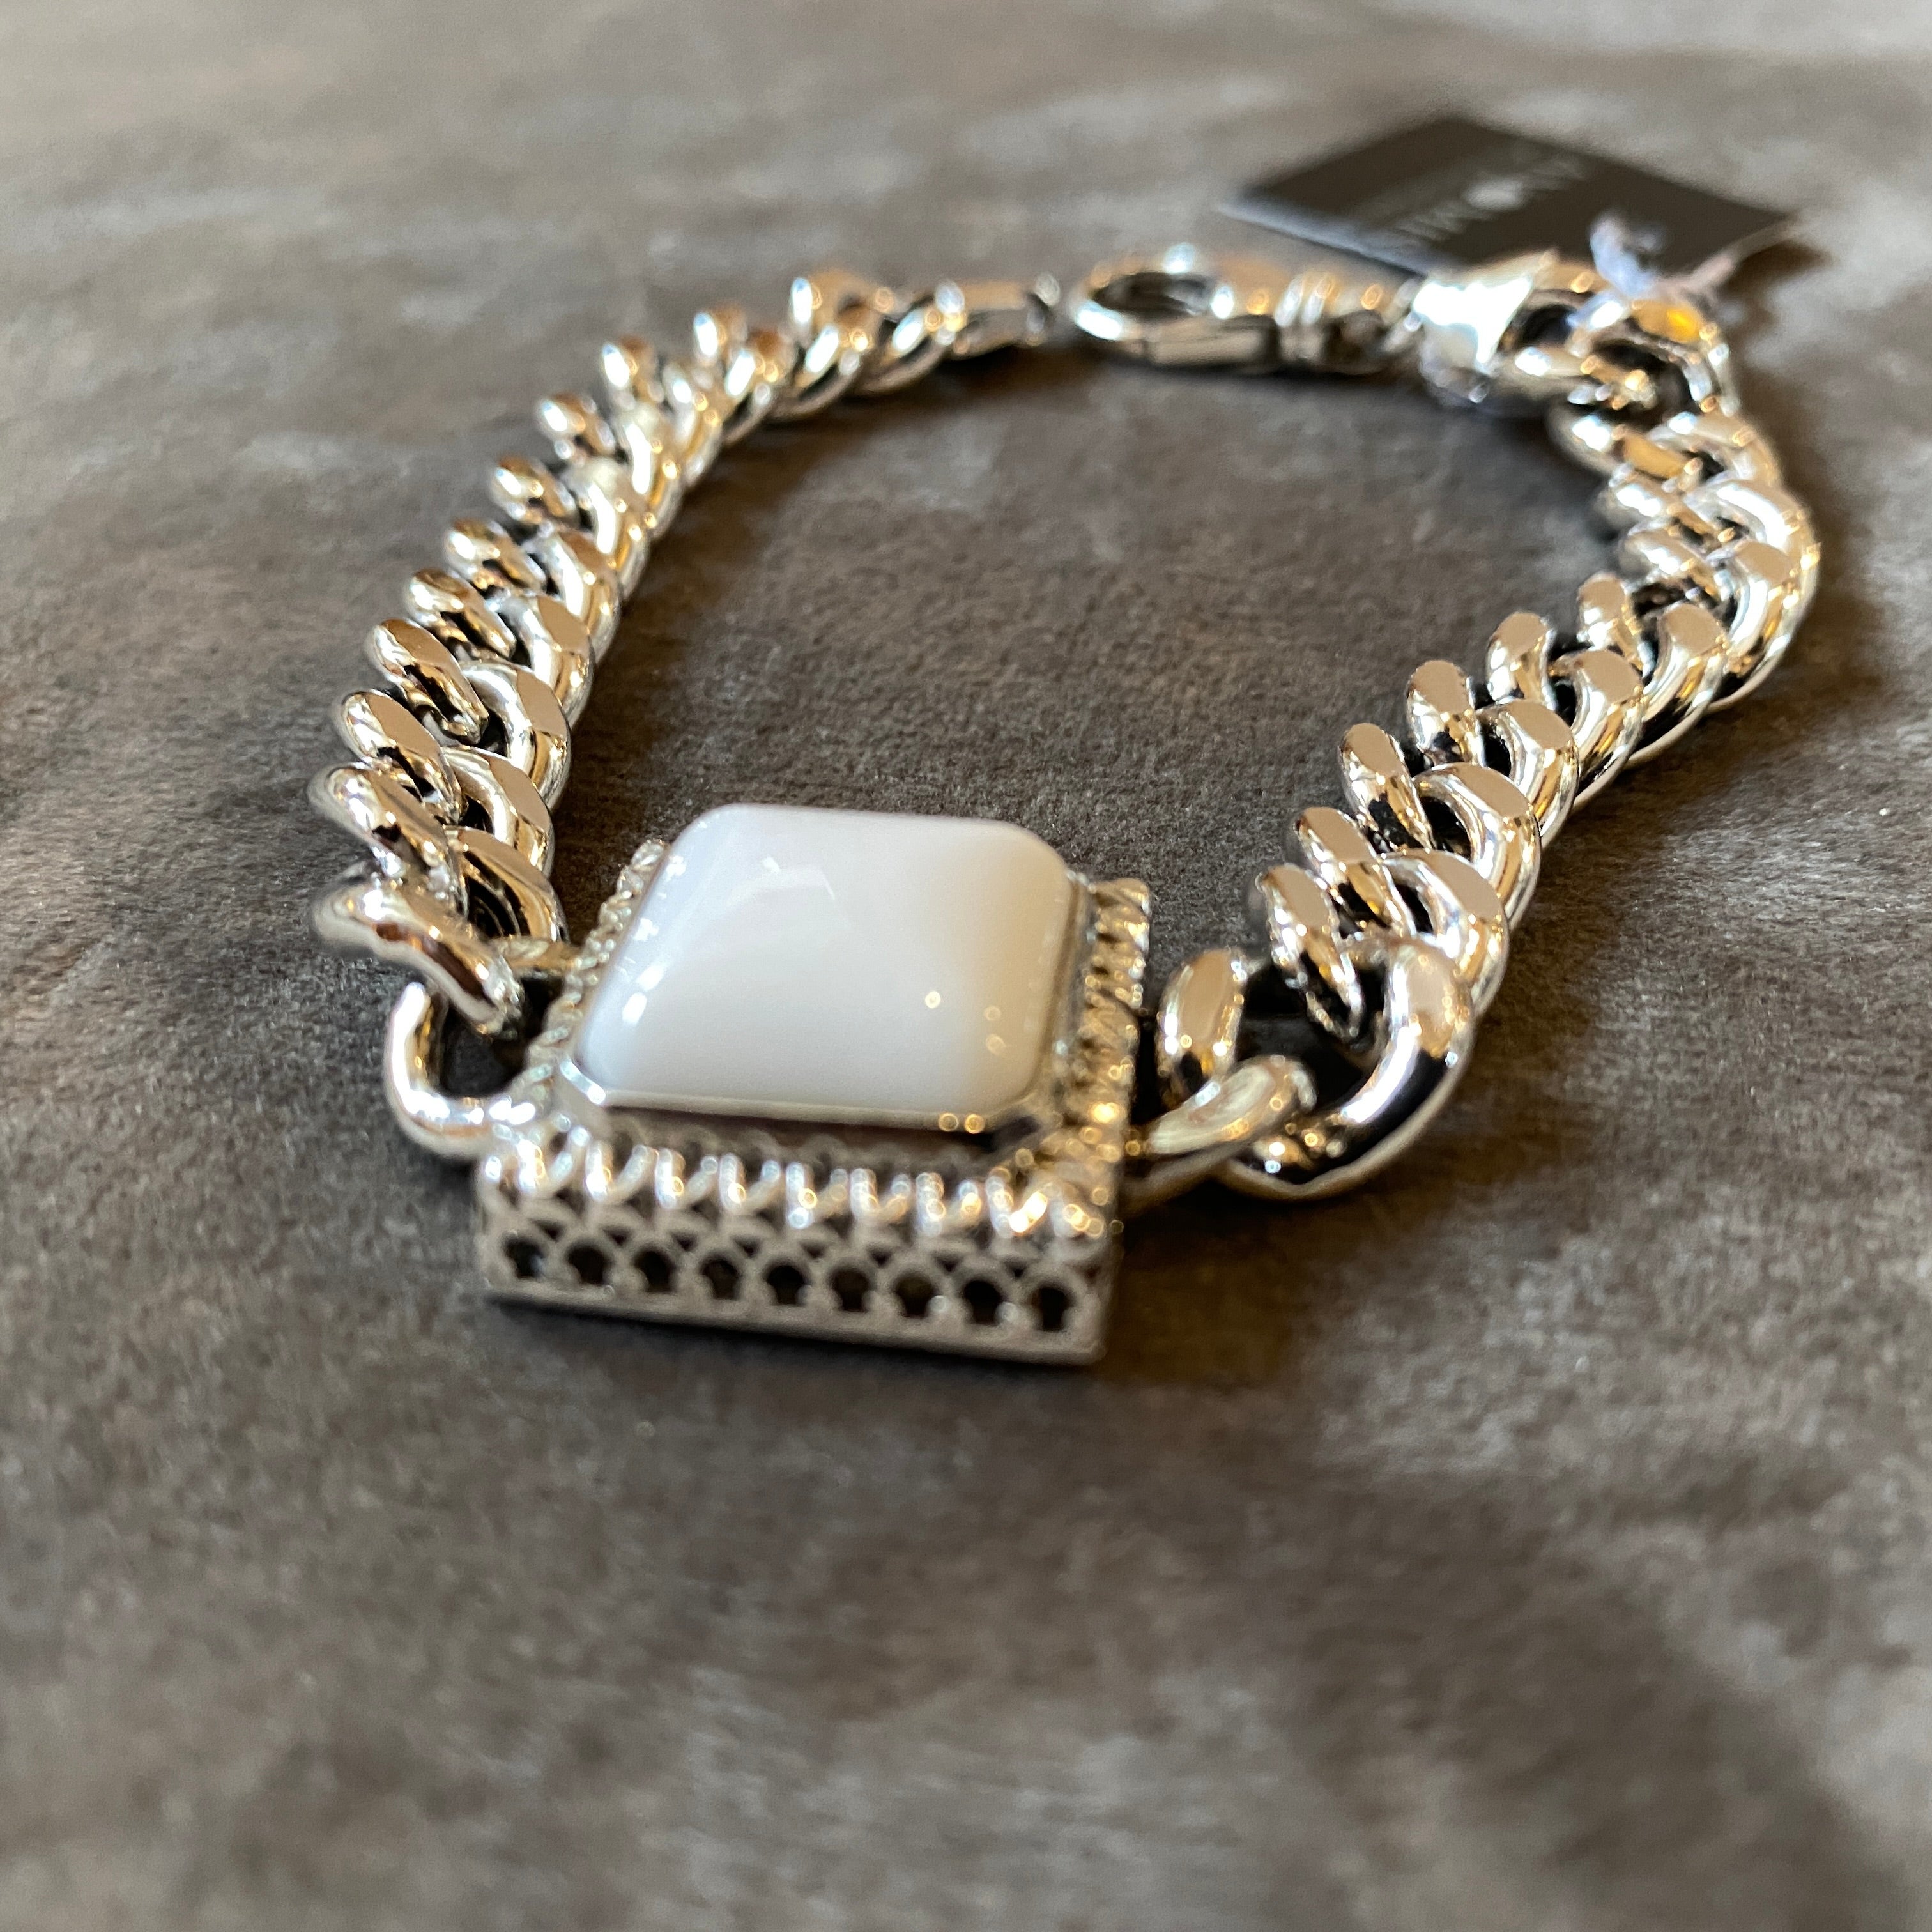 A never worn sterling silver Chanel chain bracelet designed and manufactured in Italy by Anomis ( original label ). It has been hand-crafted in Italy in the Nineties. In the middle it has a square cabochon white natural agate.